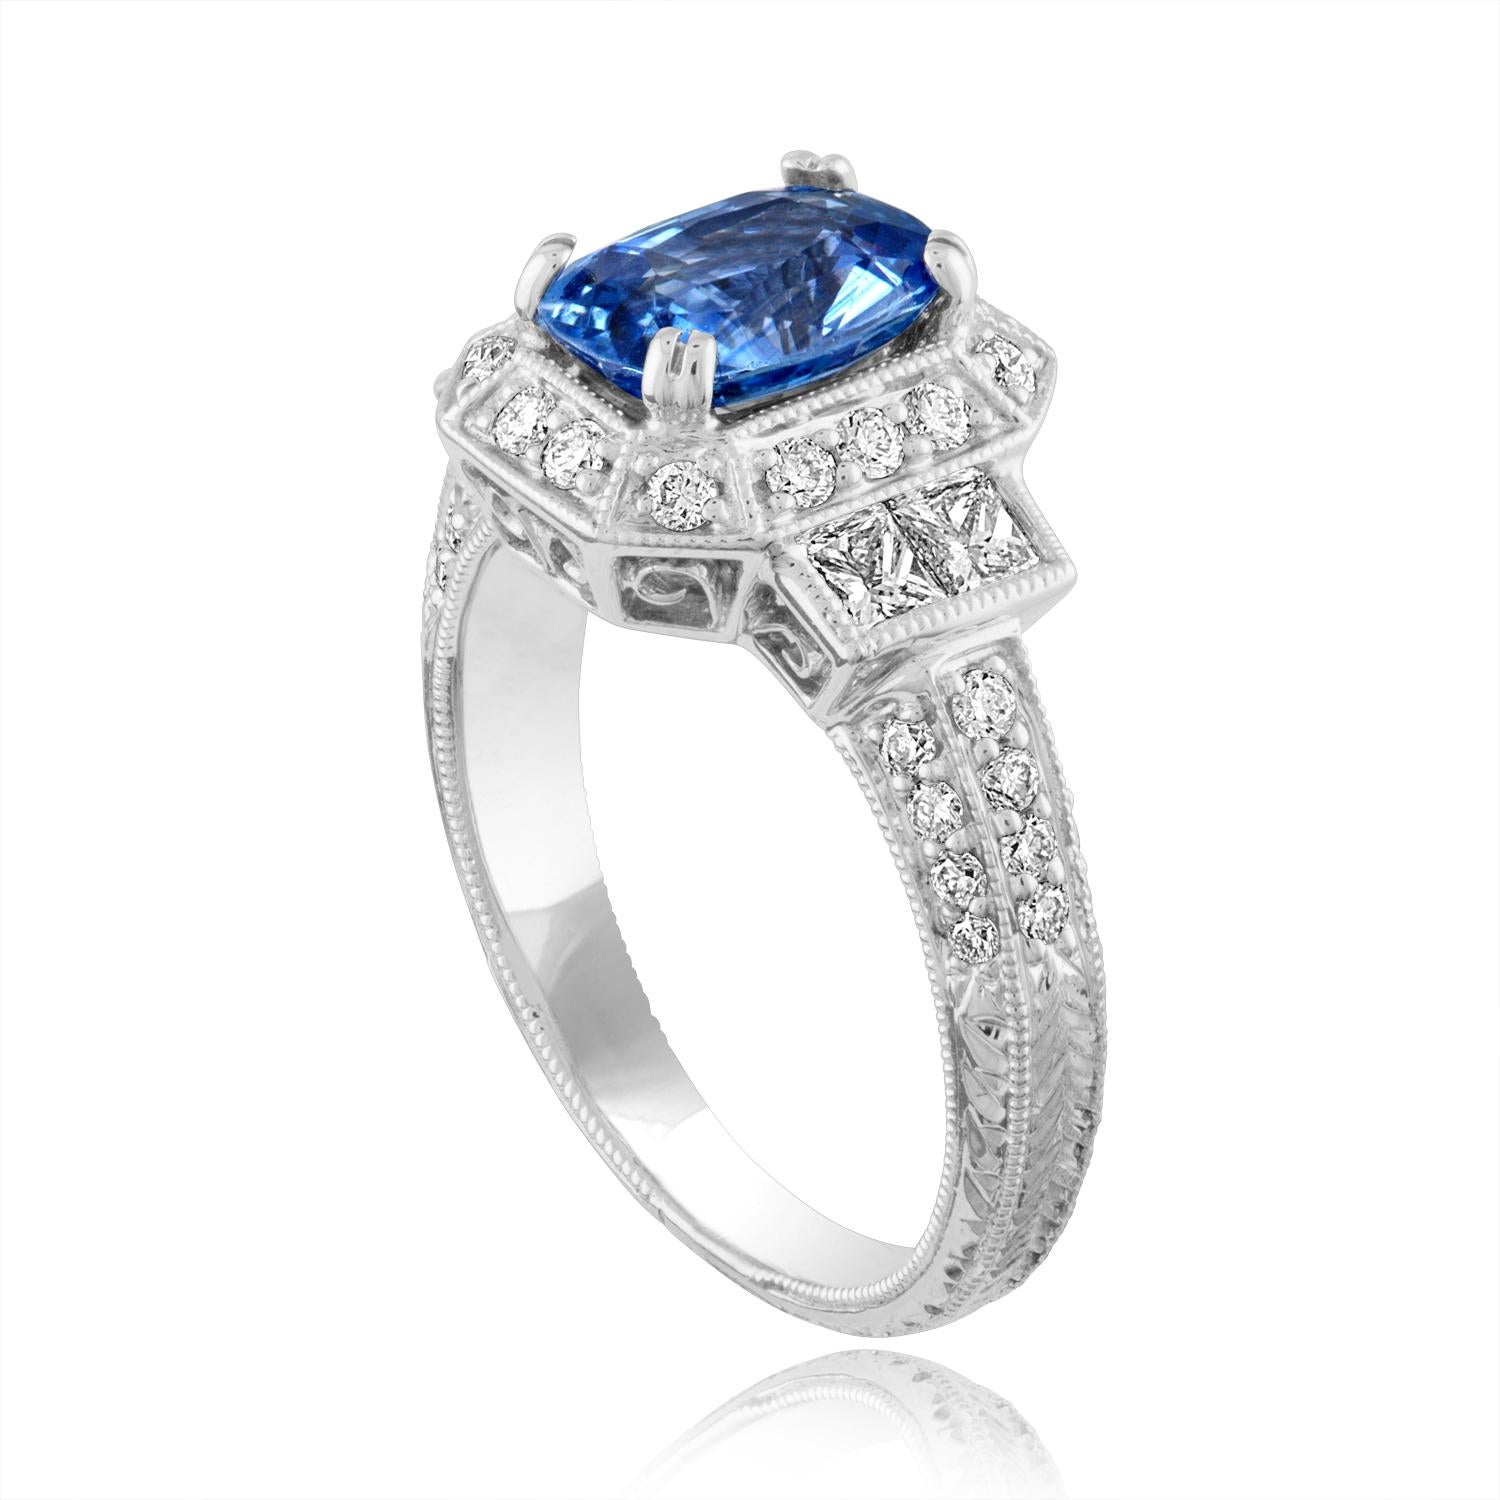 Beautiful Art Deco Revival Oval Cut Milgrain Filigree Ring
The ring is 14K White Gold
The Center Stone is an Oval Cut Blue Sapphire 1.74 Carats
The Sapphire is Heated
There are 1.00 Carats in Diamonds F/G VS/SI
The ring is a size 6.00, sizable
The